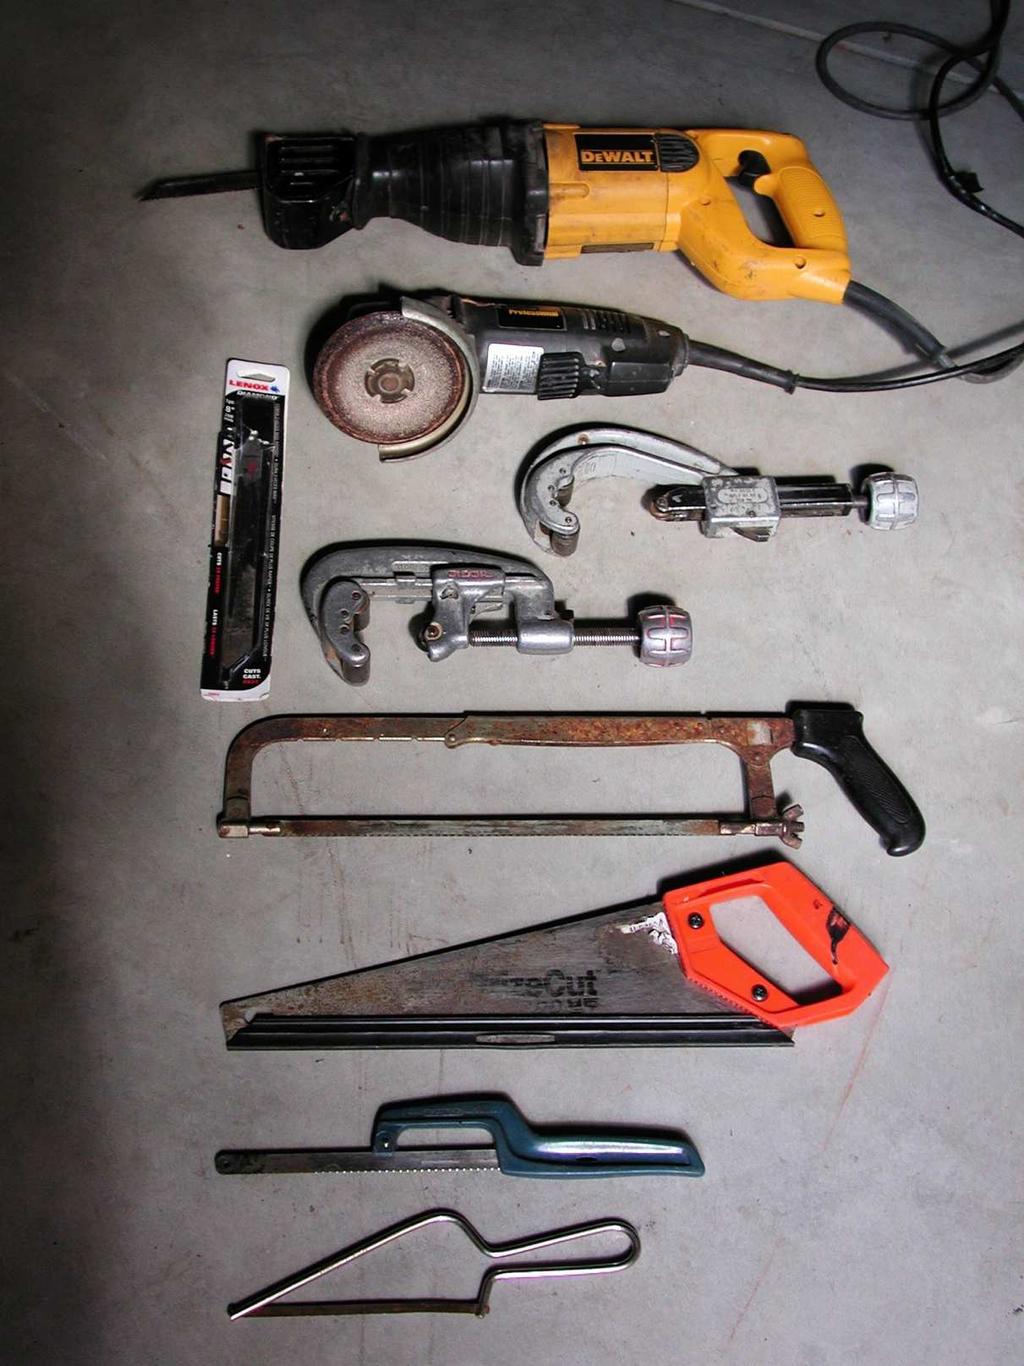 cutting into the drain sawzall ABS/PVC: tubing cutter (wheel for plastic), sawzall, handsaw grinder plastic tubing cutter galvanized: sawzall, hacksaw DWV tubing cutter